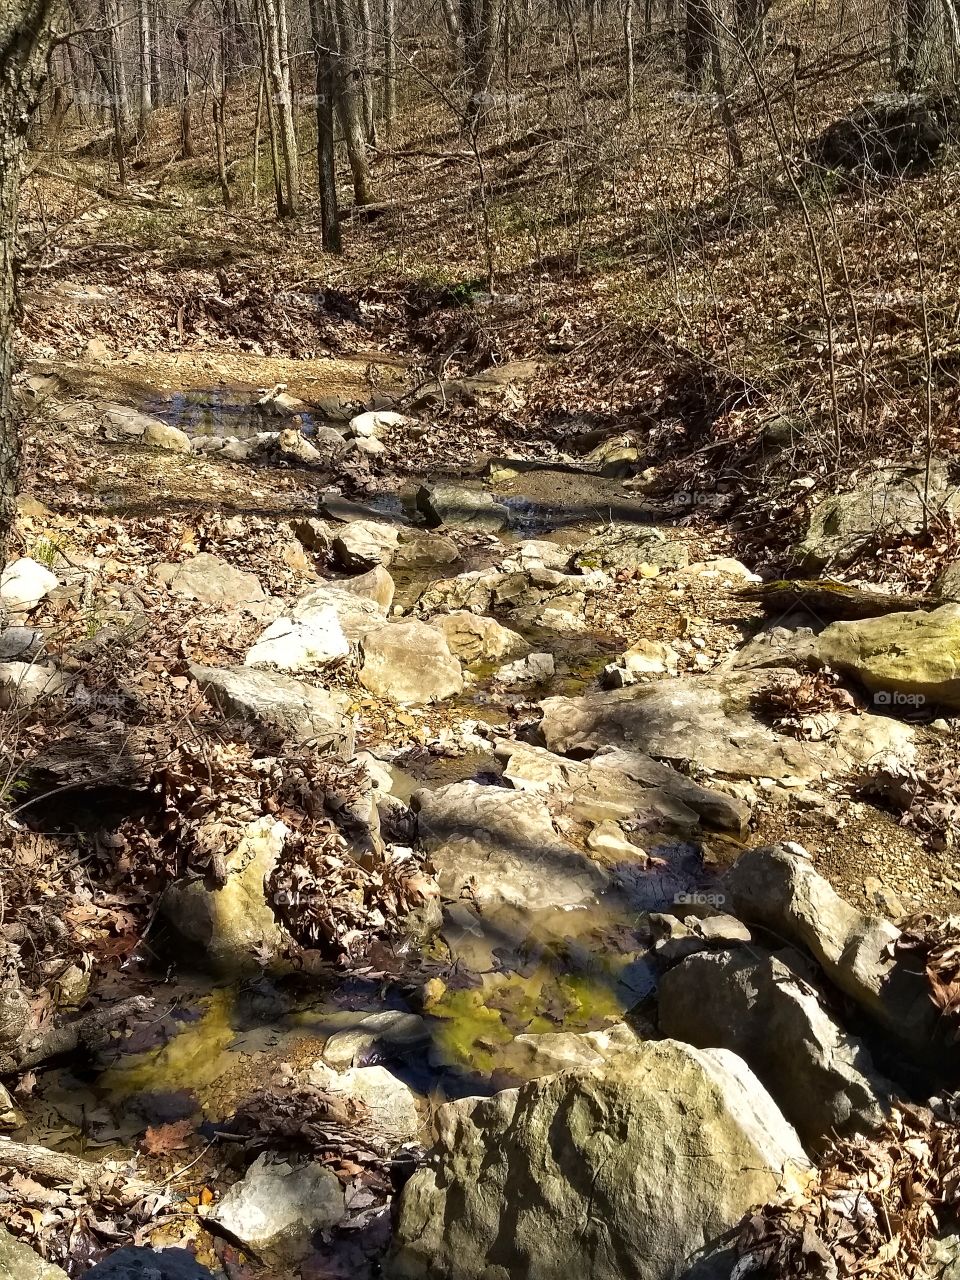 Ravine along a hiking trail in Opposum Hollow, at Knob Noster State Park.